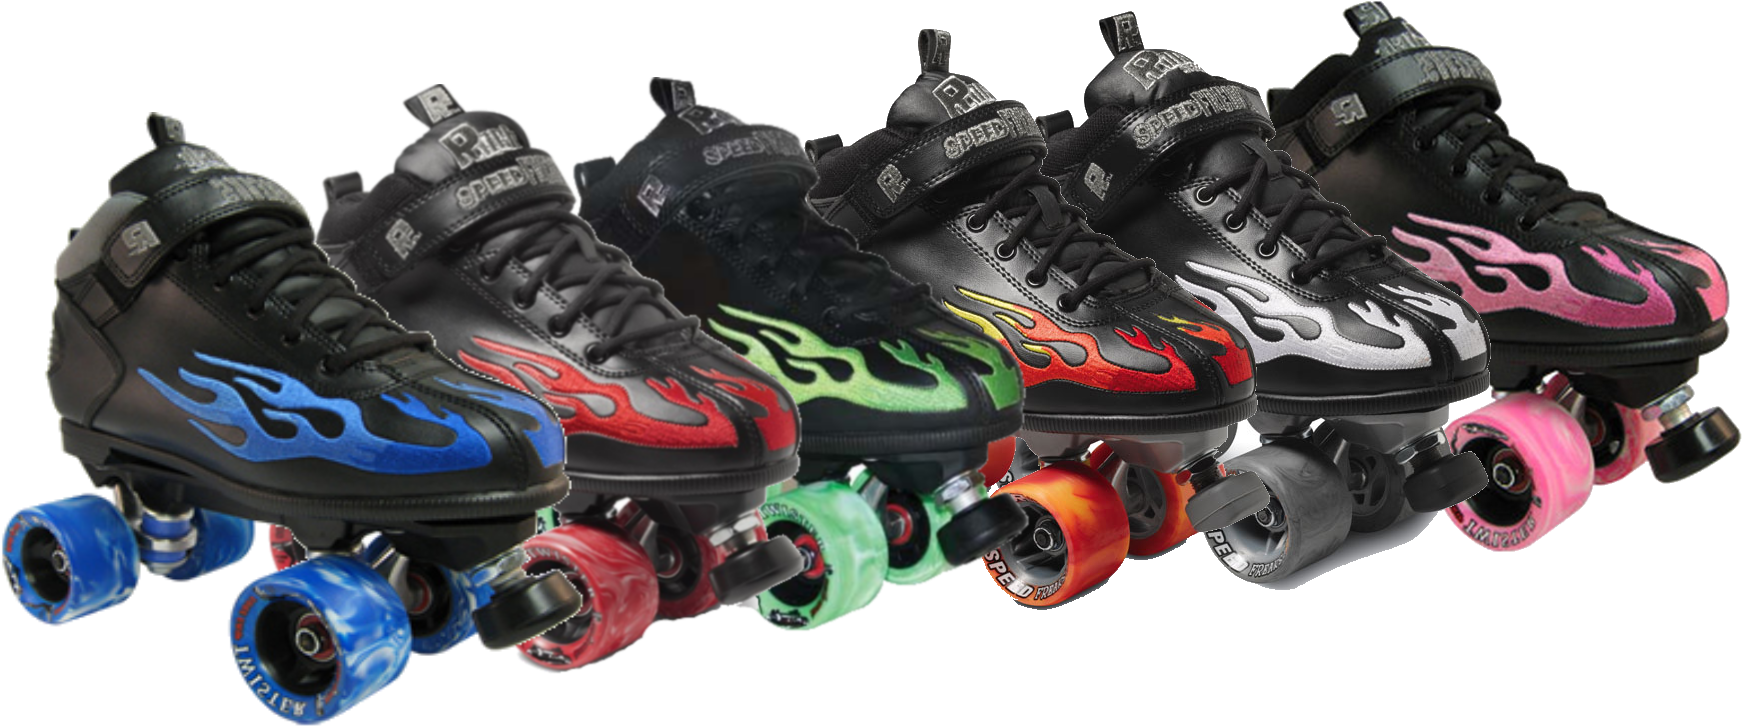 Colorful Inline Skates Array PNG